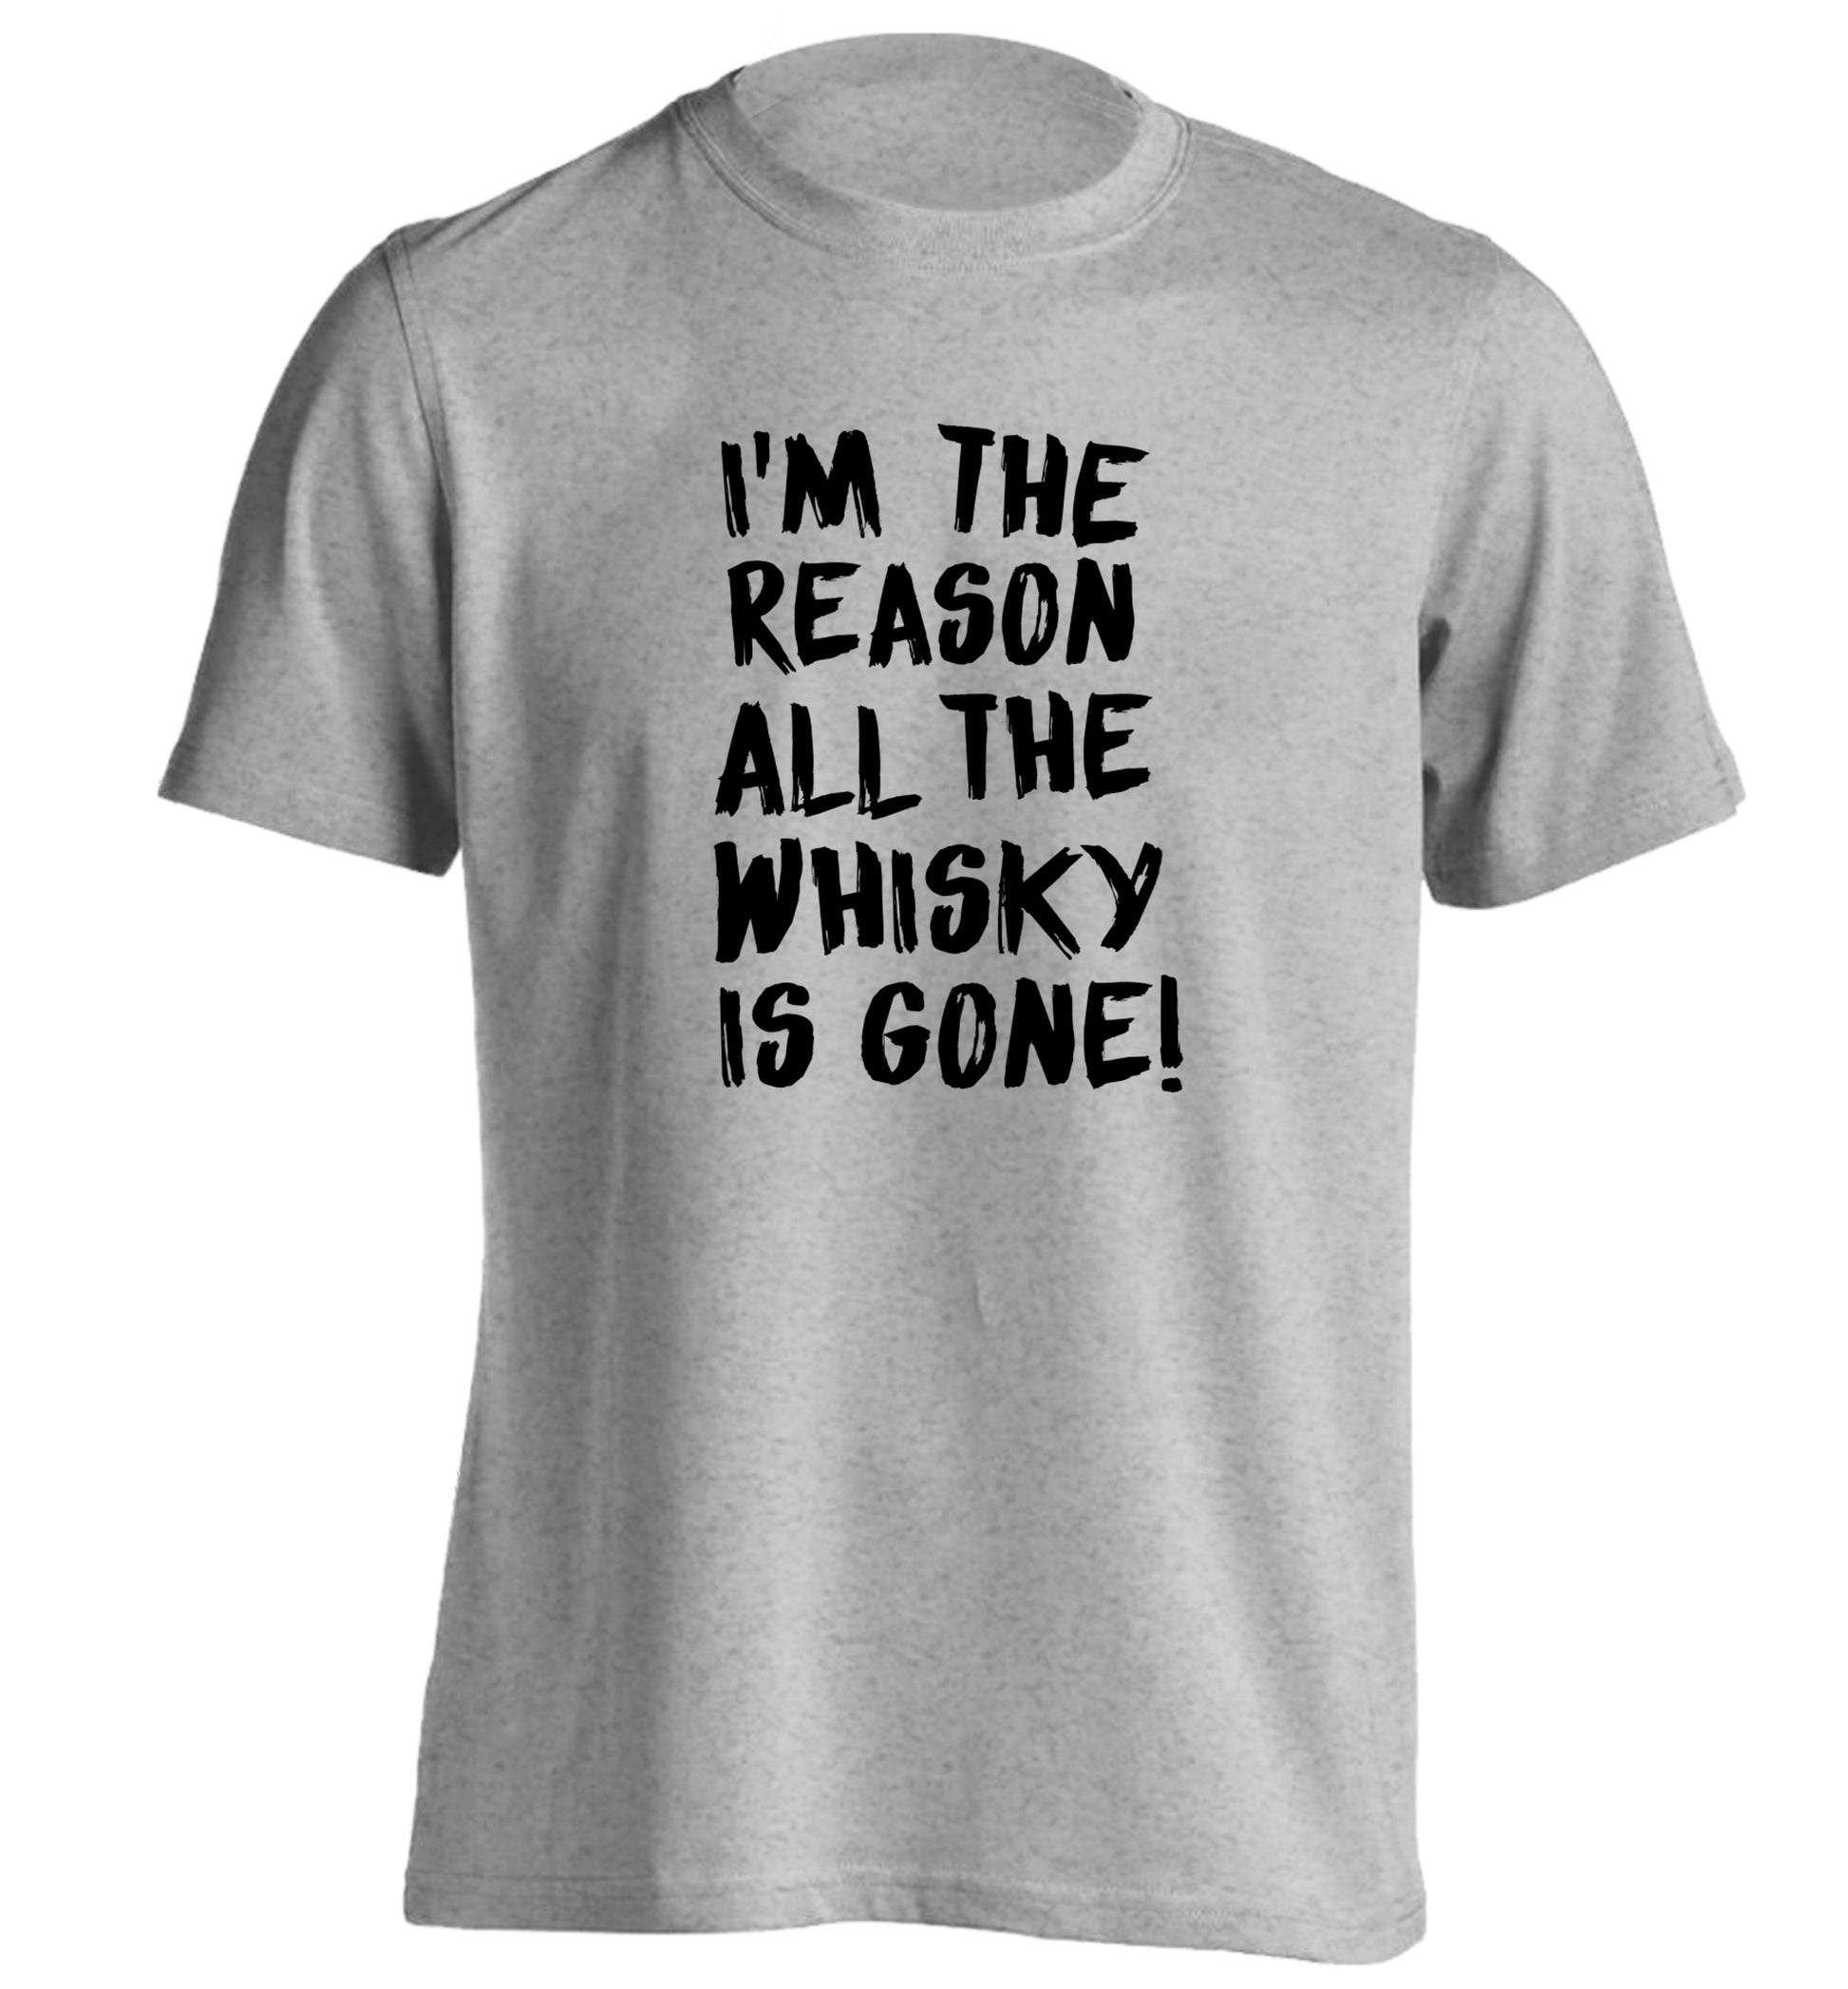 I'm the reason all the whisky is gone adults unisex grey Tshirt 2XL